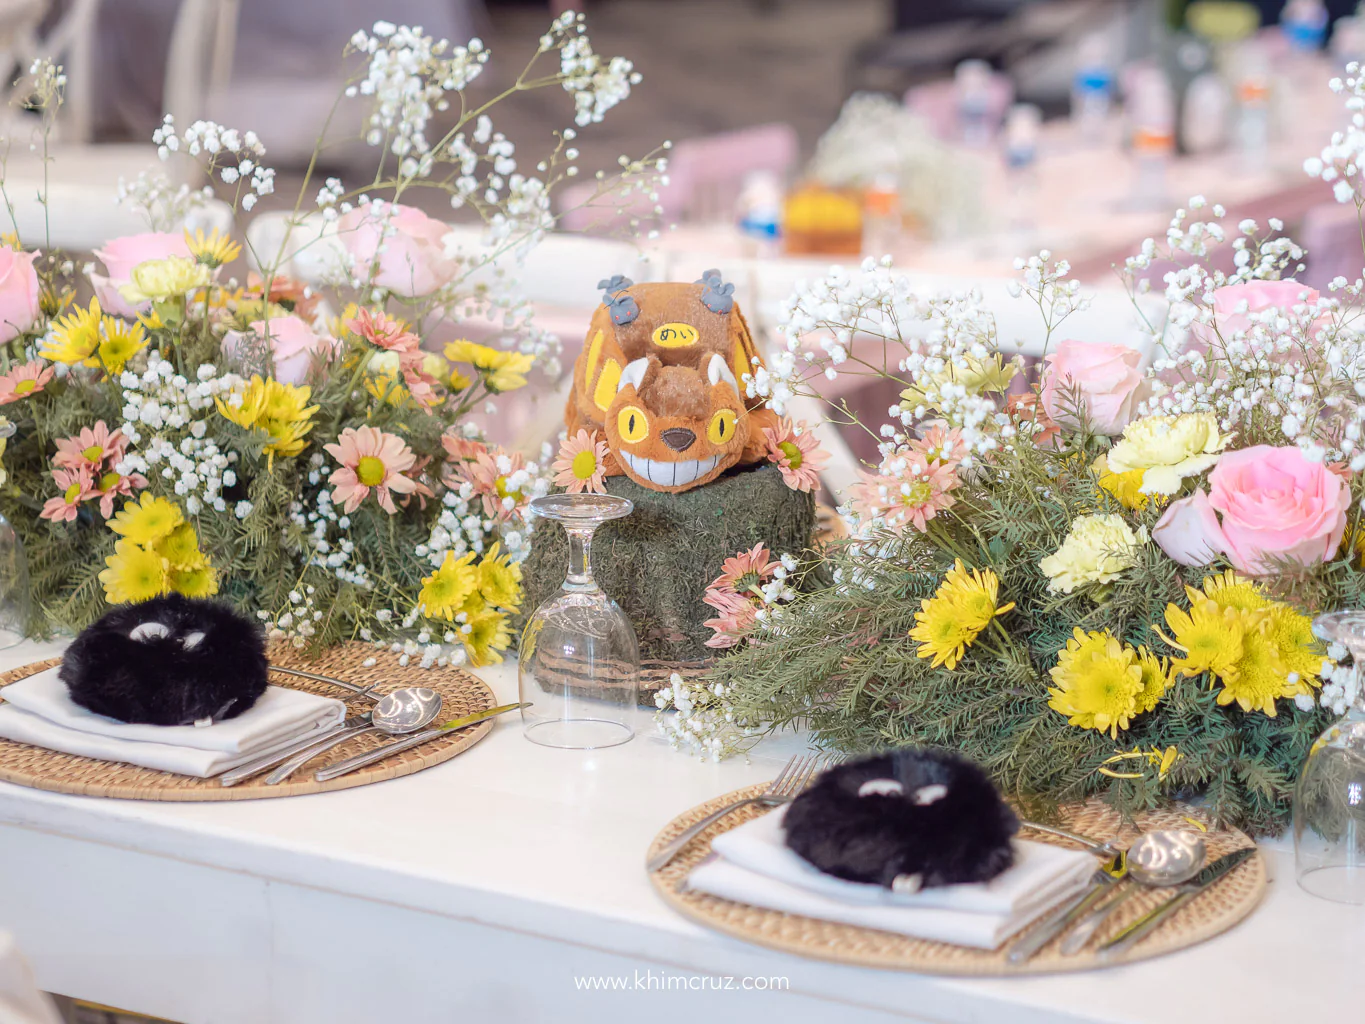 Floral table centerpiece with Catbus and Totoro Sprite table details